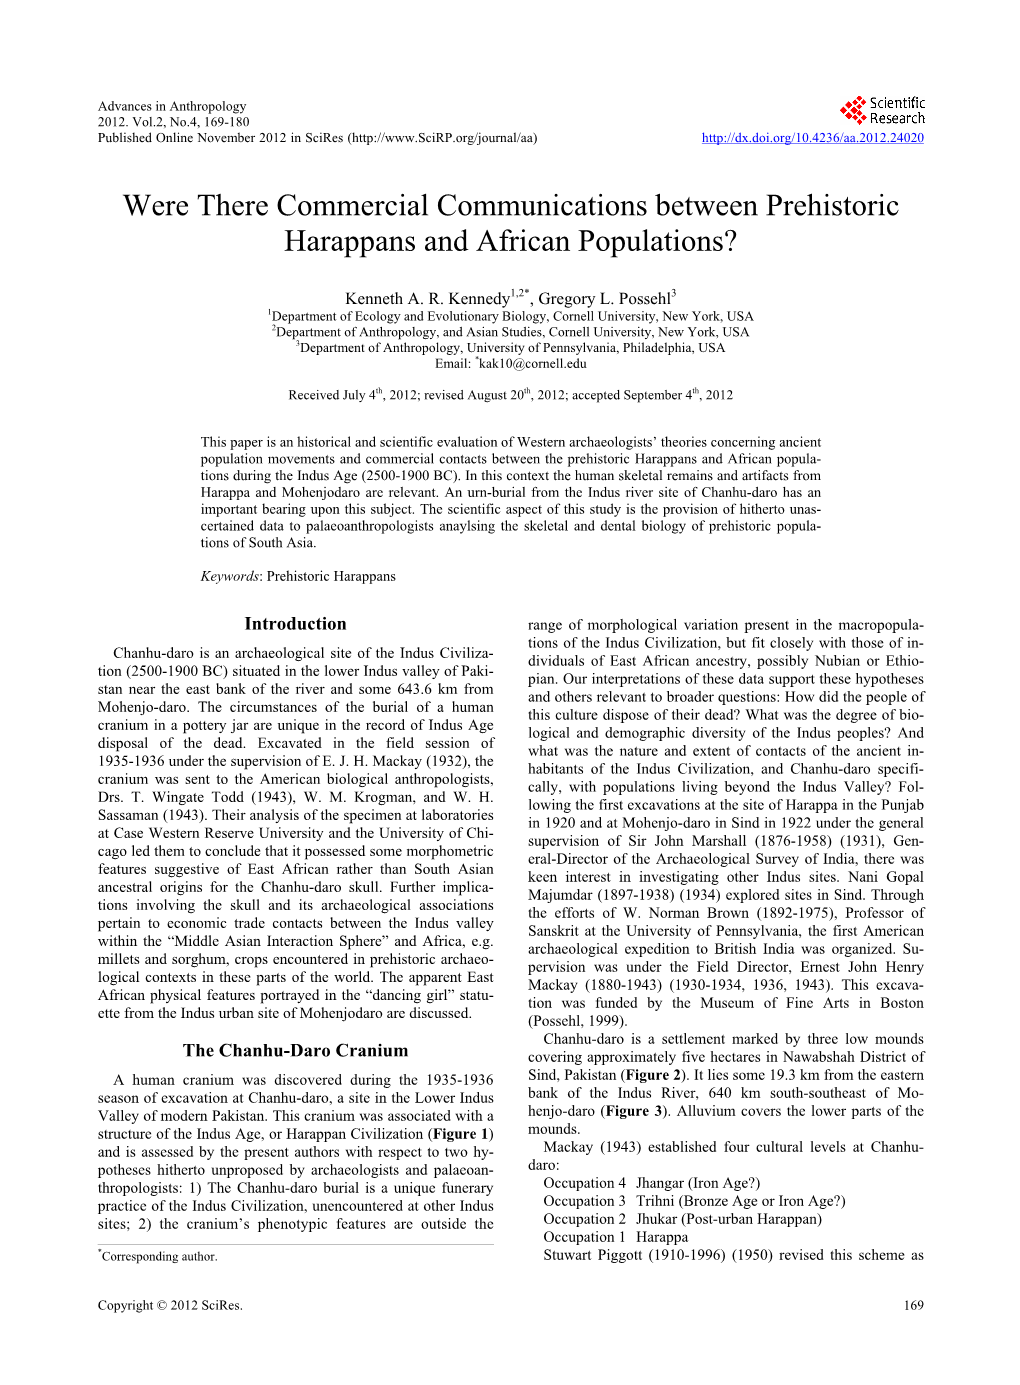 Were There Commercial Communications Between Prehistoric Harappans and African Populations?